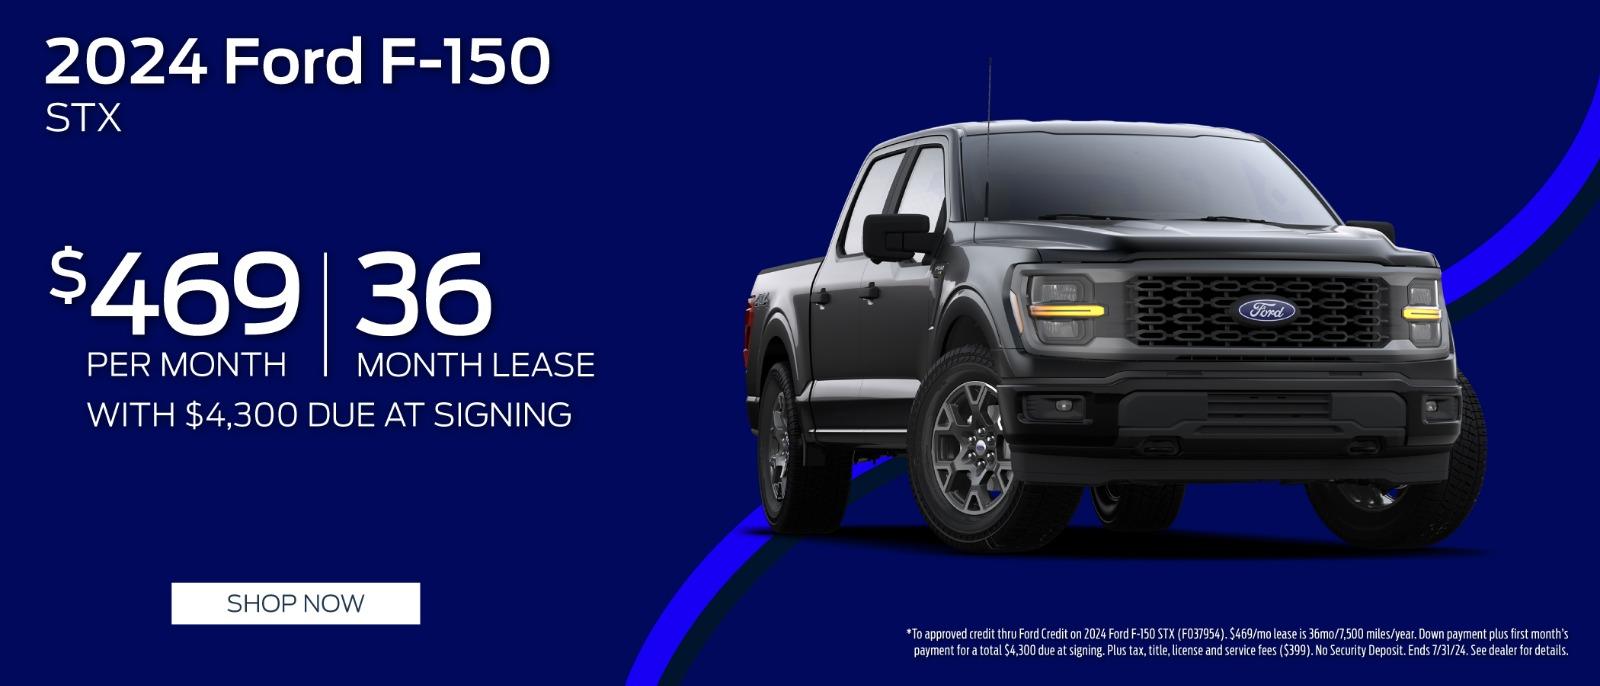 2024 Ford F-150  $469 per  month for 36 months